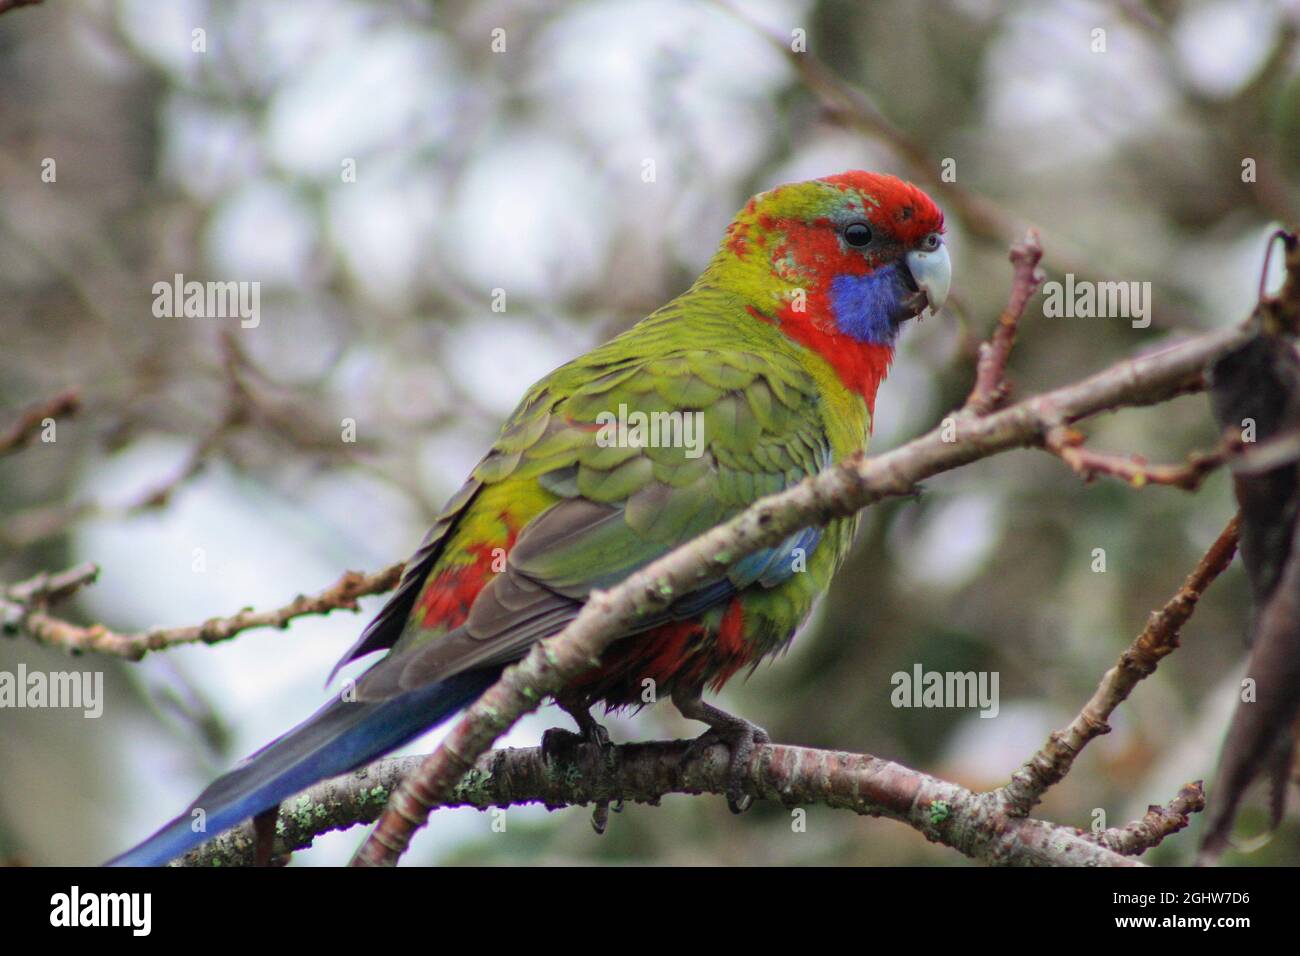 Colorful Rosella (parrot) looks at you. New South Wales, Australia Stock Photo